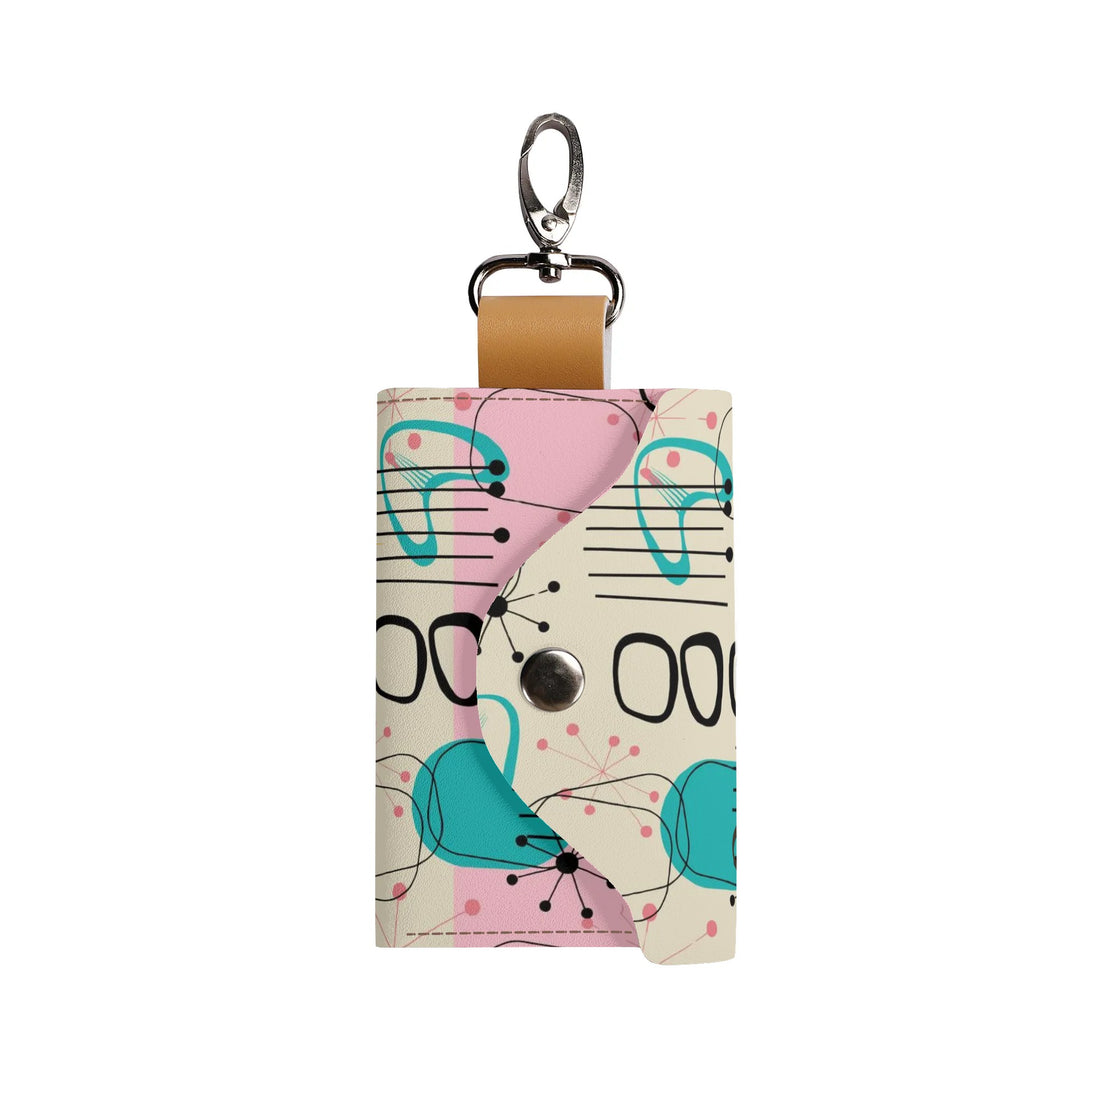 Mid Century Modern Atomic Cat Keychain Purse, Retro Pink, Turquoise, and Black Keychain Wallet